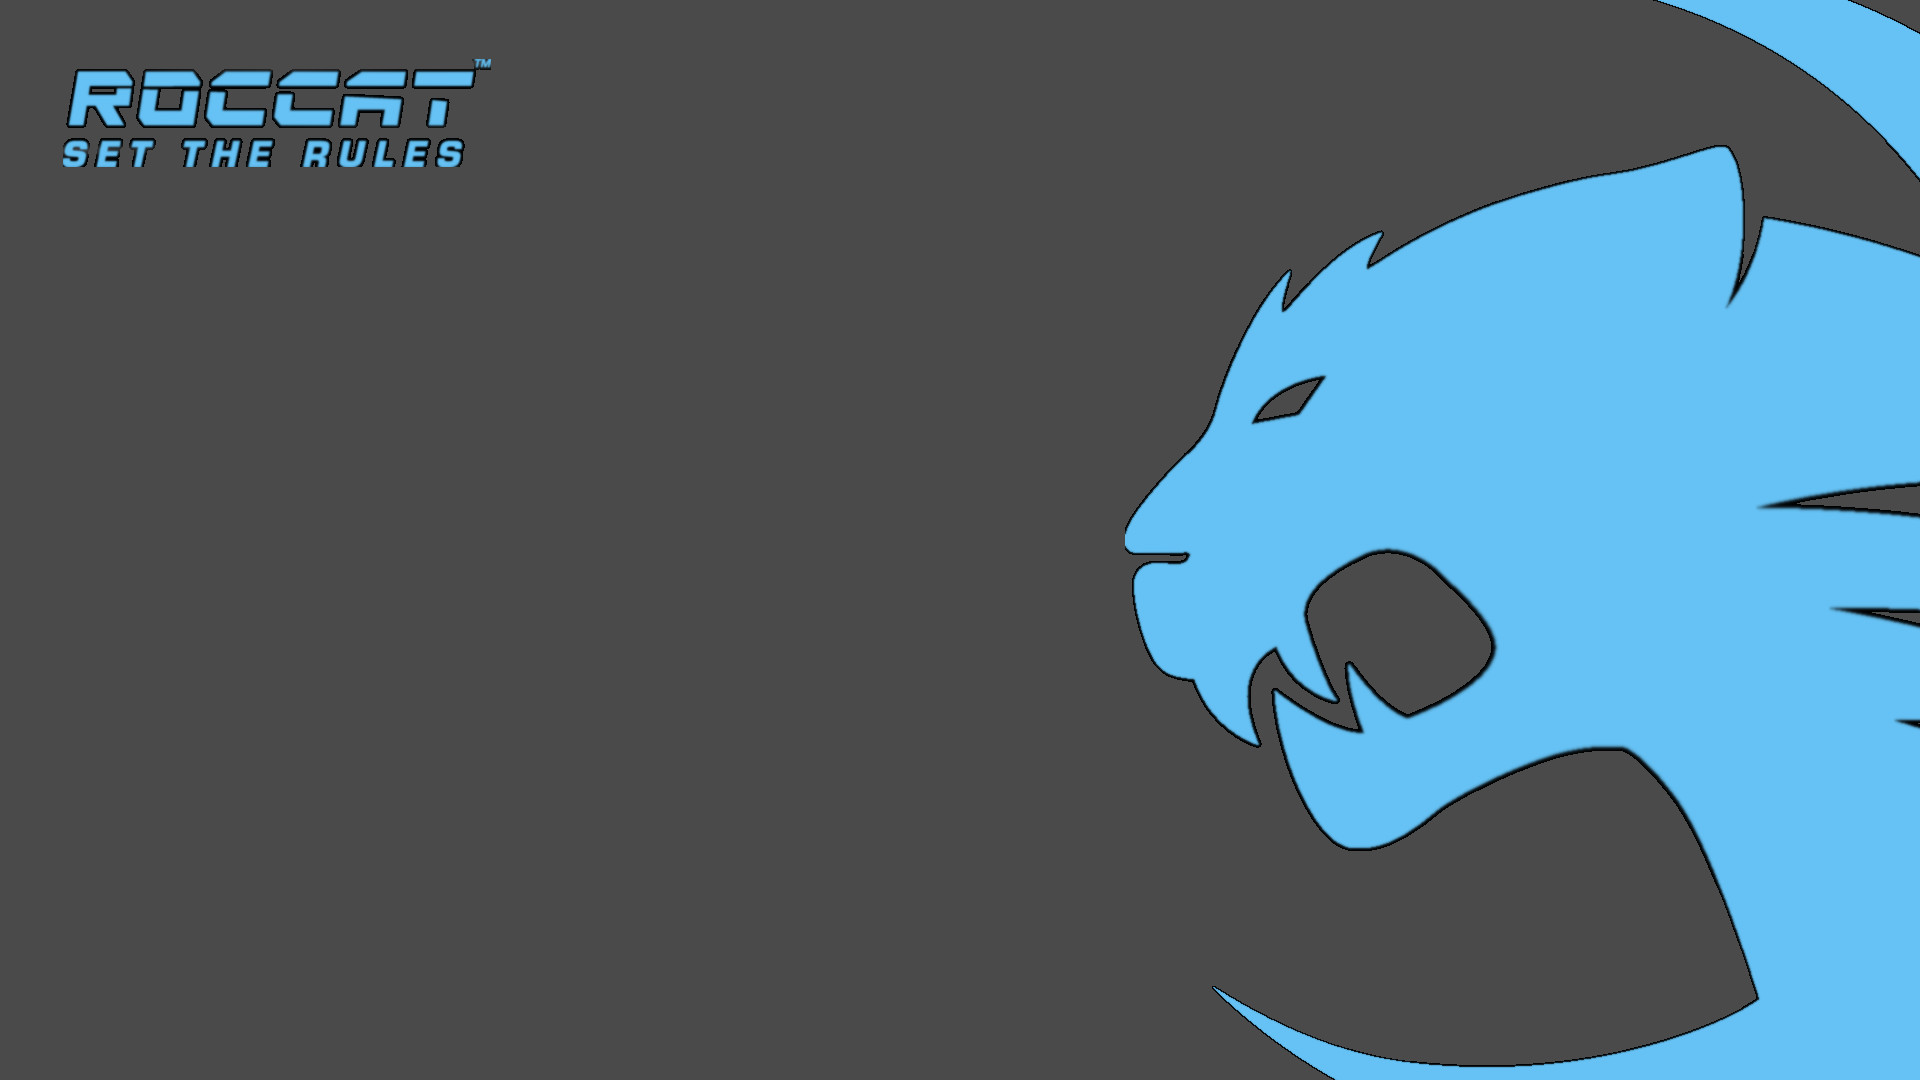 1920x1080 i noticed a lack of a roccat version so i made my own, let me know if you  want it changed slightly ...